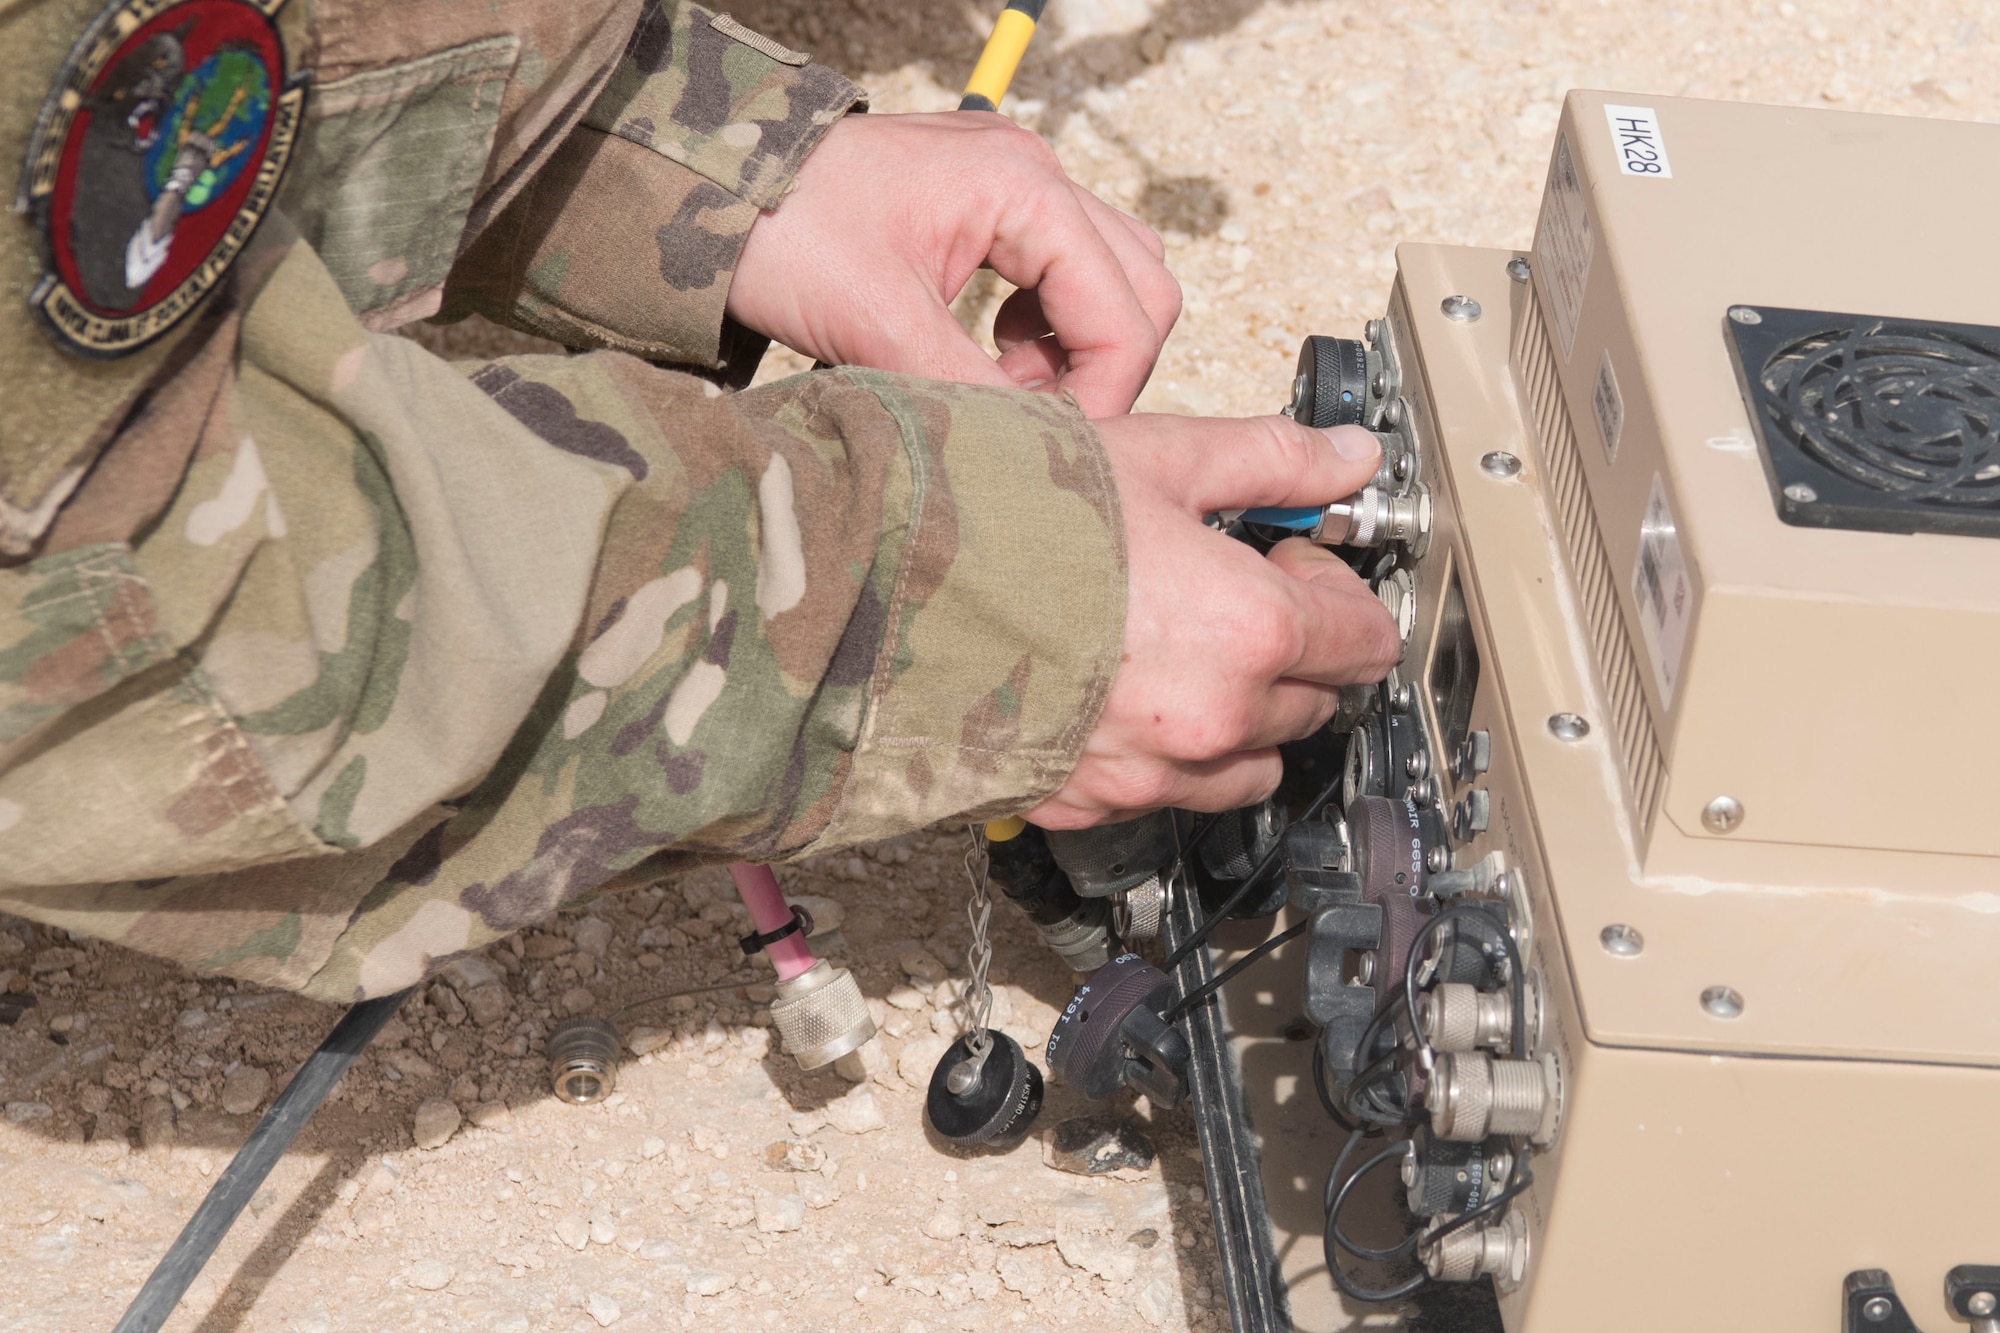 Airman 1st Class Riley Warren, 332nd Expeditionary Communications Squadron cyber transport technician and native of Fort Worth, Texas, uses a communication flyaway kit to set up communication ability as part of an exercise March 22, 2018, at an undisclosed location in Southwest Asia.